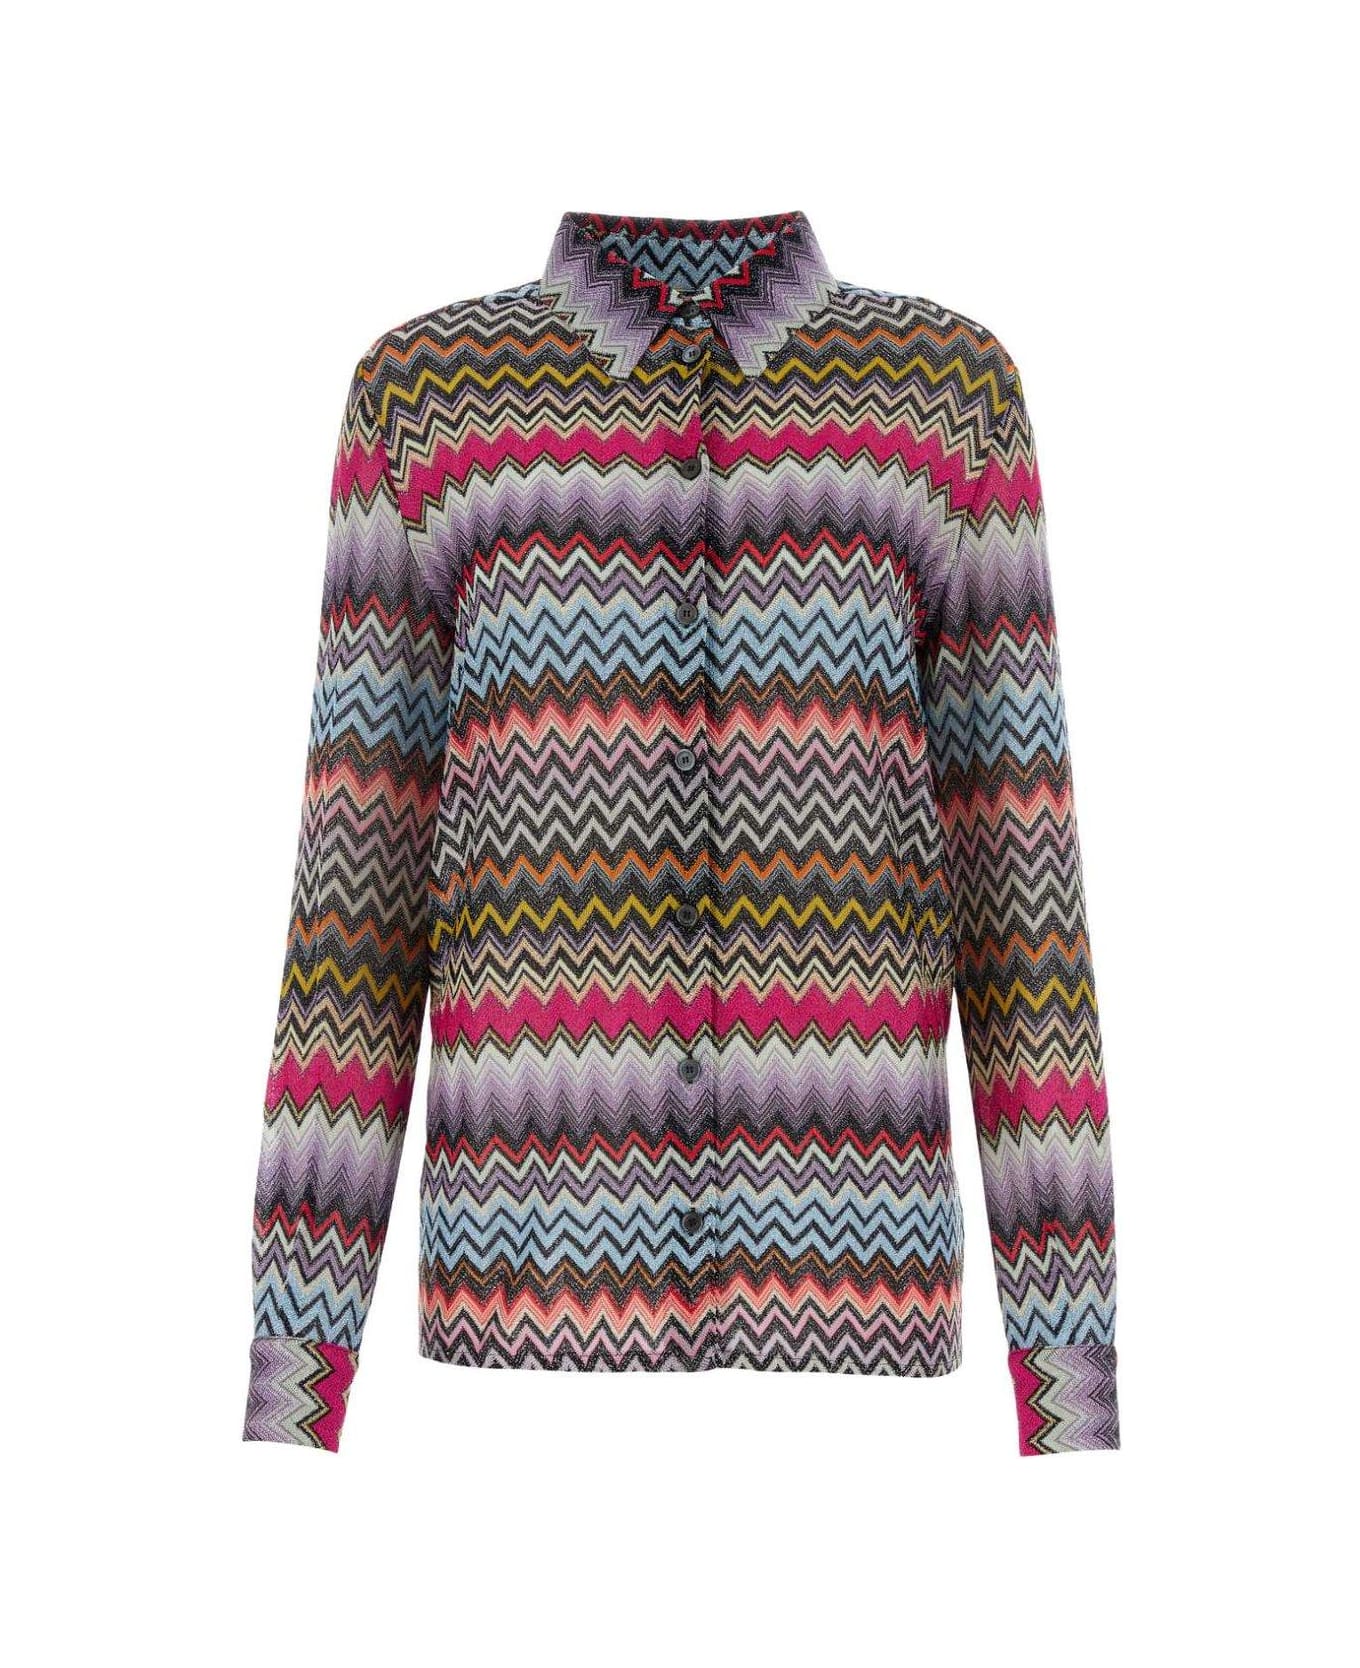 Missoni Patternede Embroidered Button-up Long-sleeved Shirt - Multicolor